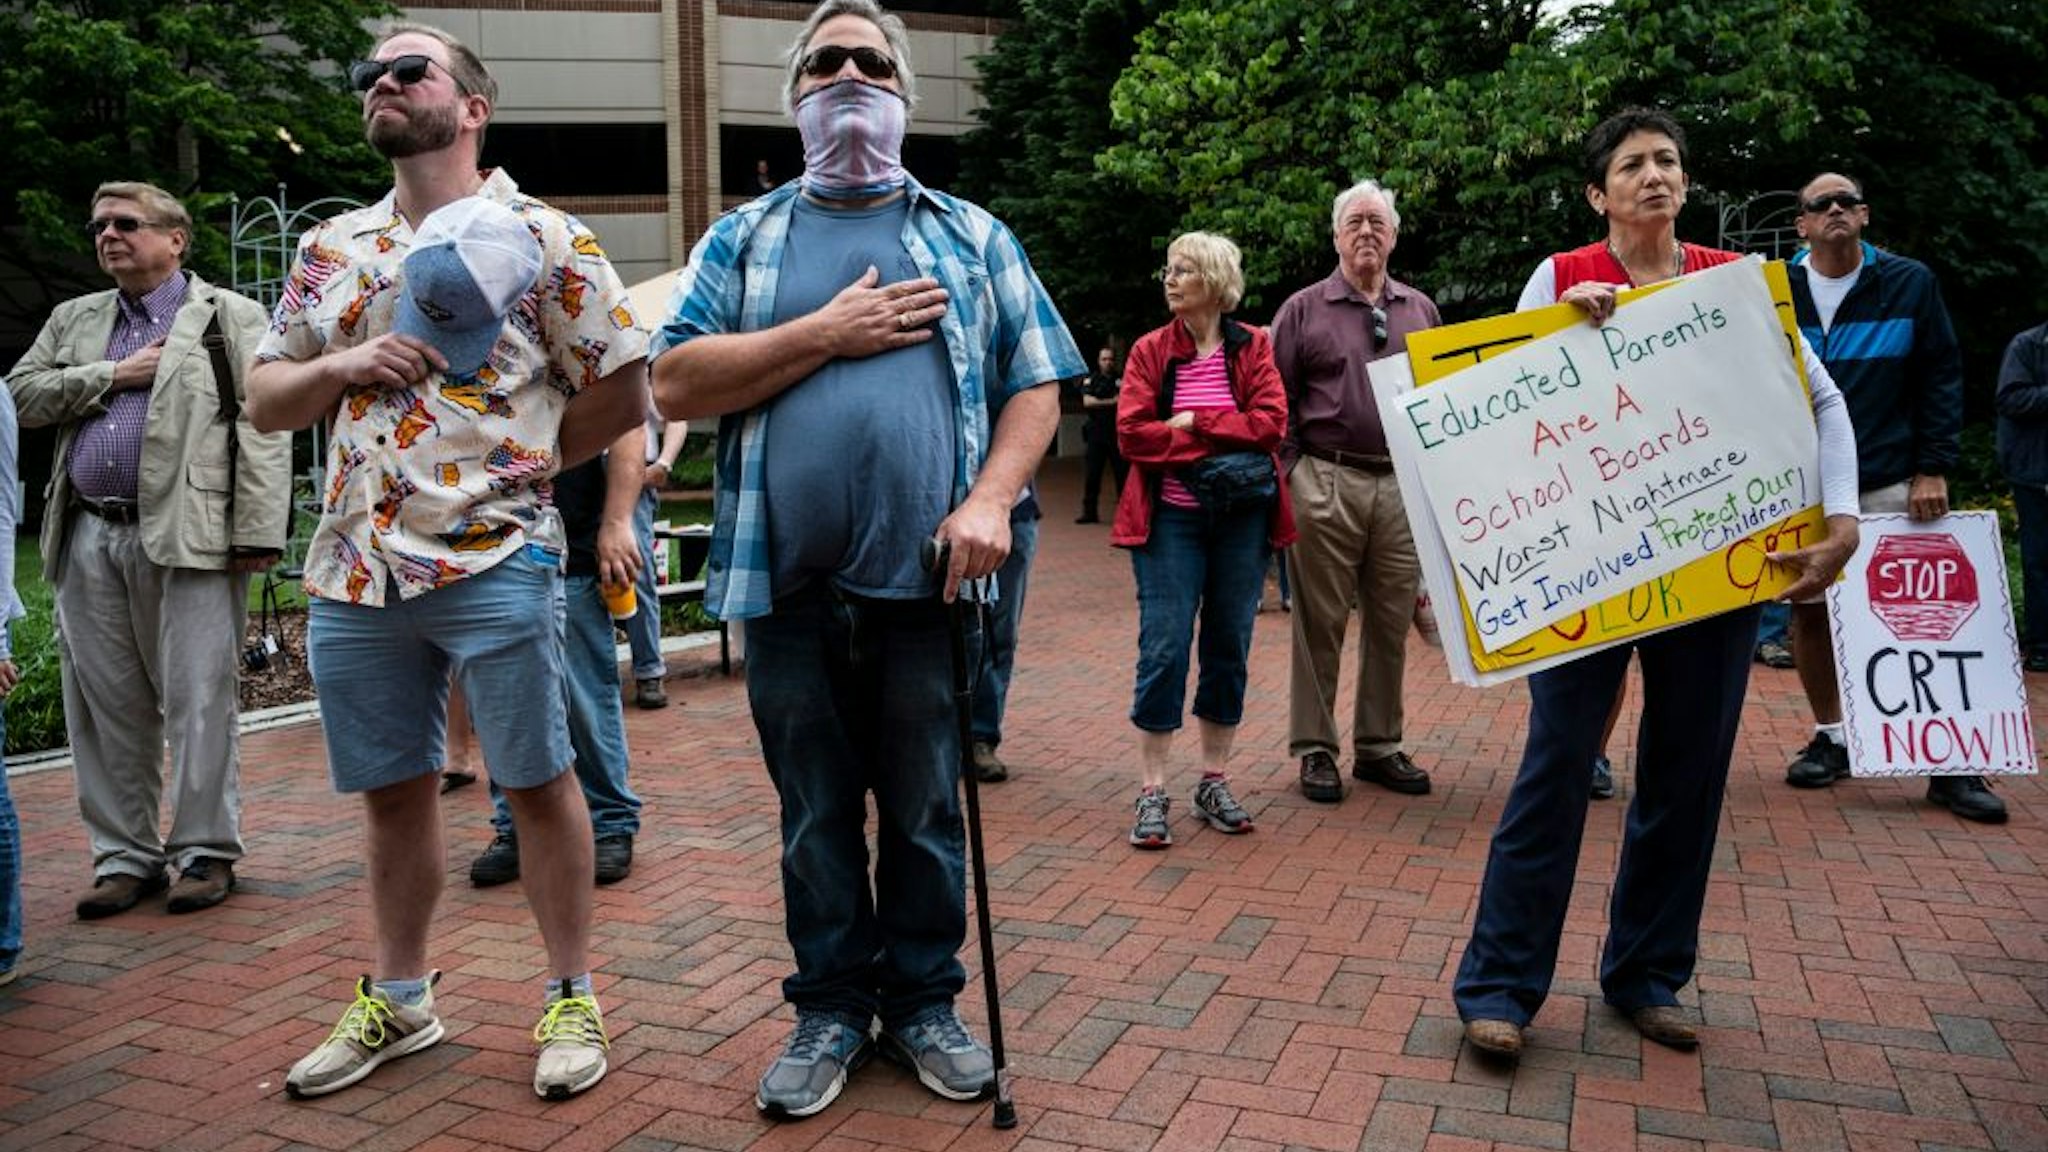 People hold up signs during a rally against "critical race theory" (CRT) being taught in schools at the Loudoun County Government center in Leesburg, Virginia on June 12, 2021. - "Are you ready to take back our schools?" Republican activist Patti Menders shouted at a rally opposing anti-racism teaching that critics like her say trains white children to see themselves as "oppressors." "Yes!", answered in unison the hundreds of demonstrators gathered this weekend near Washington to fight against "critical race theory," the latest battleground of America's ongoing culture wars. The term "critical race theory" defines a strand of thought that appeared in American law schools in the late 1970s and which looks at racism as a system, enabled by laws and institutions, rather than at the level of individual prejudices. But critics use it as a catch-all phrase that attacks teachers' efforts to confront dark episodes in American history, including slavery and segregation, as well as to tackle racist stereotypes.